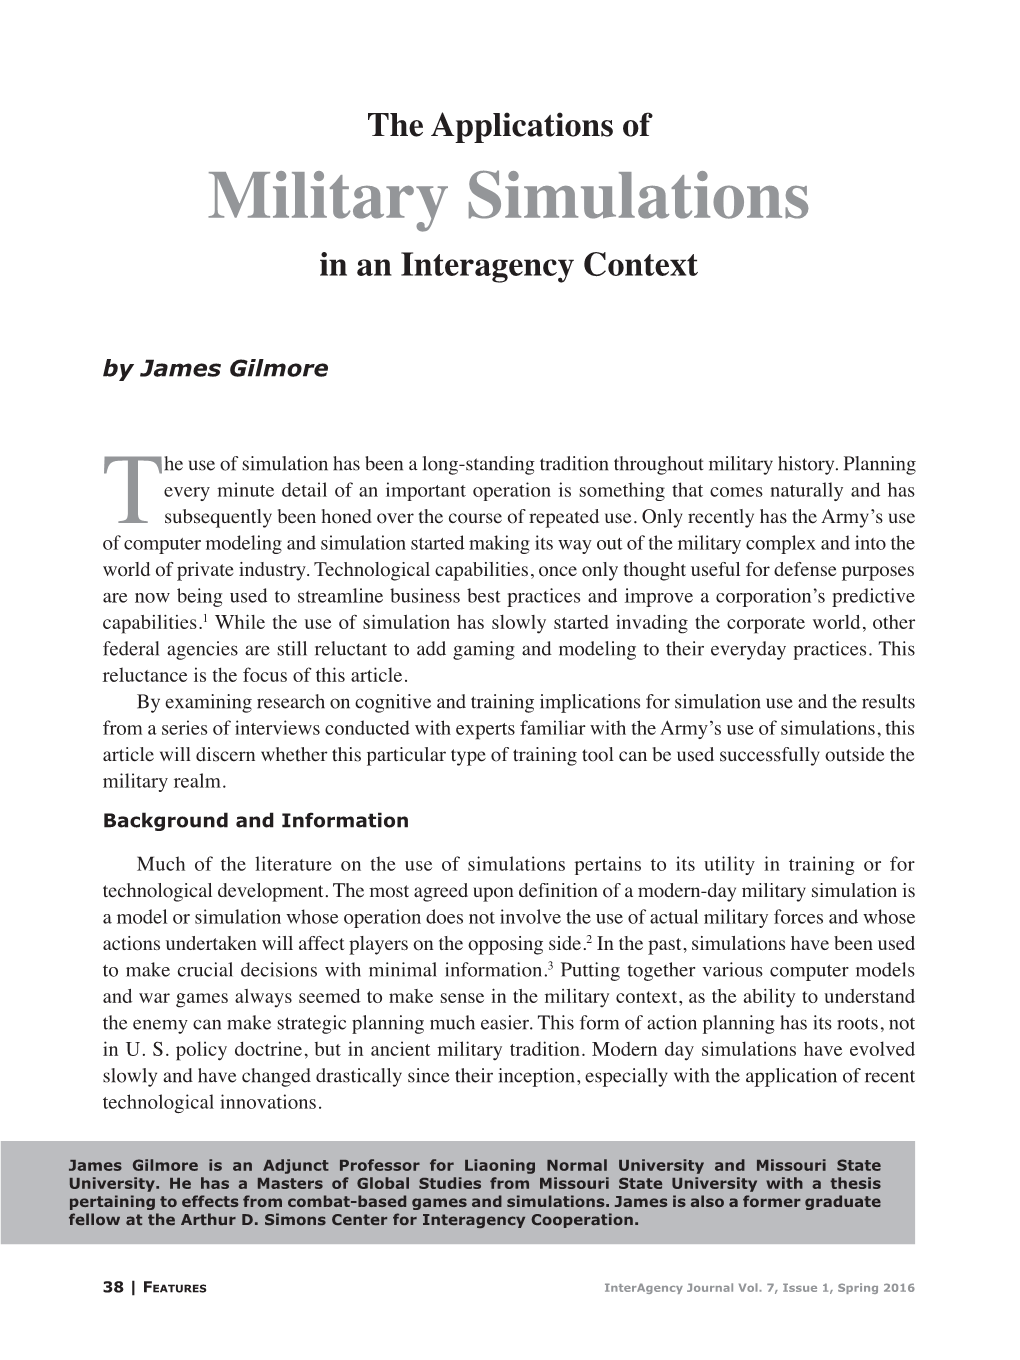 Military Simulations in an Interagency Context